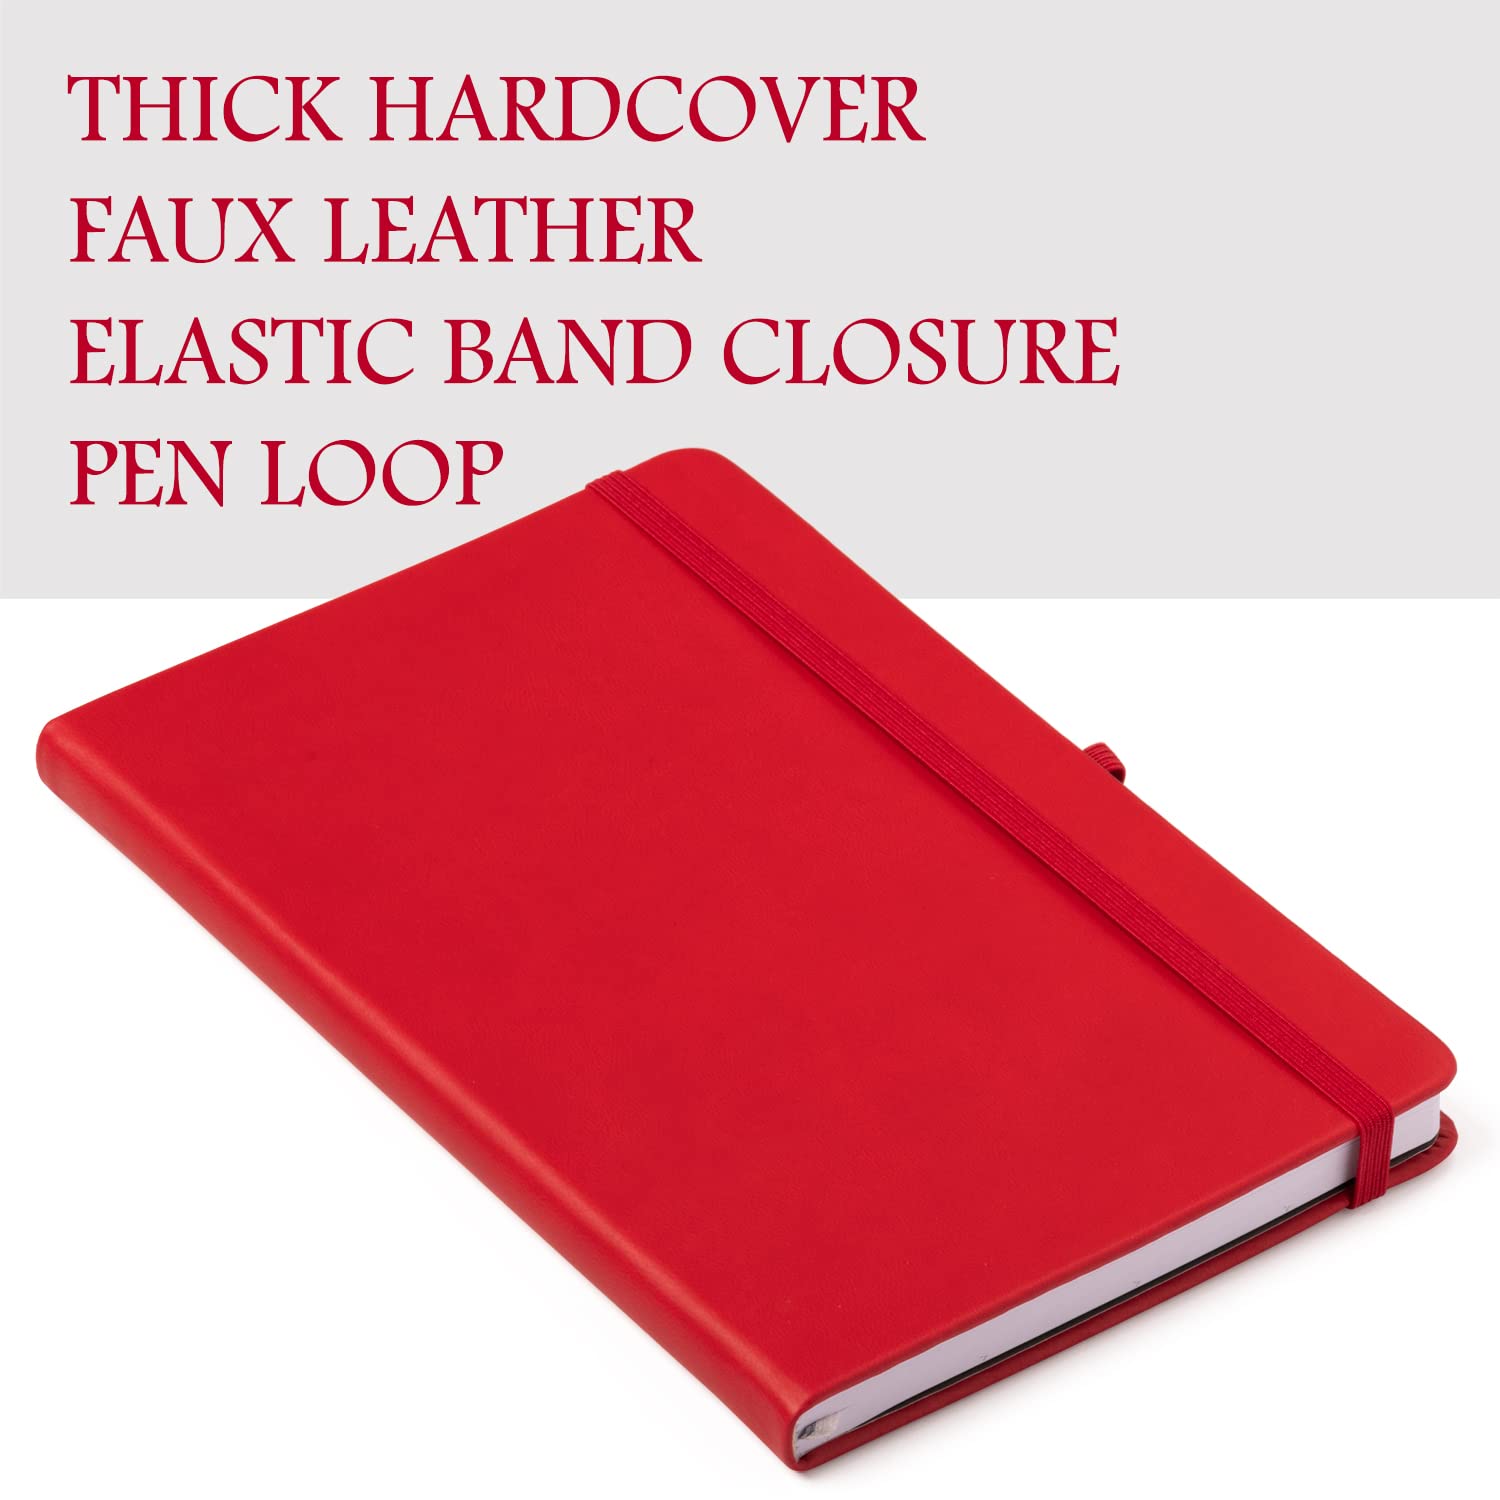 192 Pages White Lined Paper Journal with Elastic Band Closure